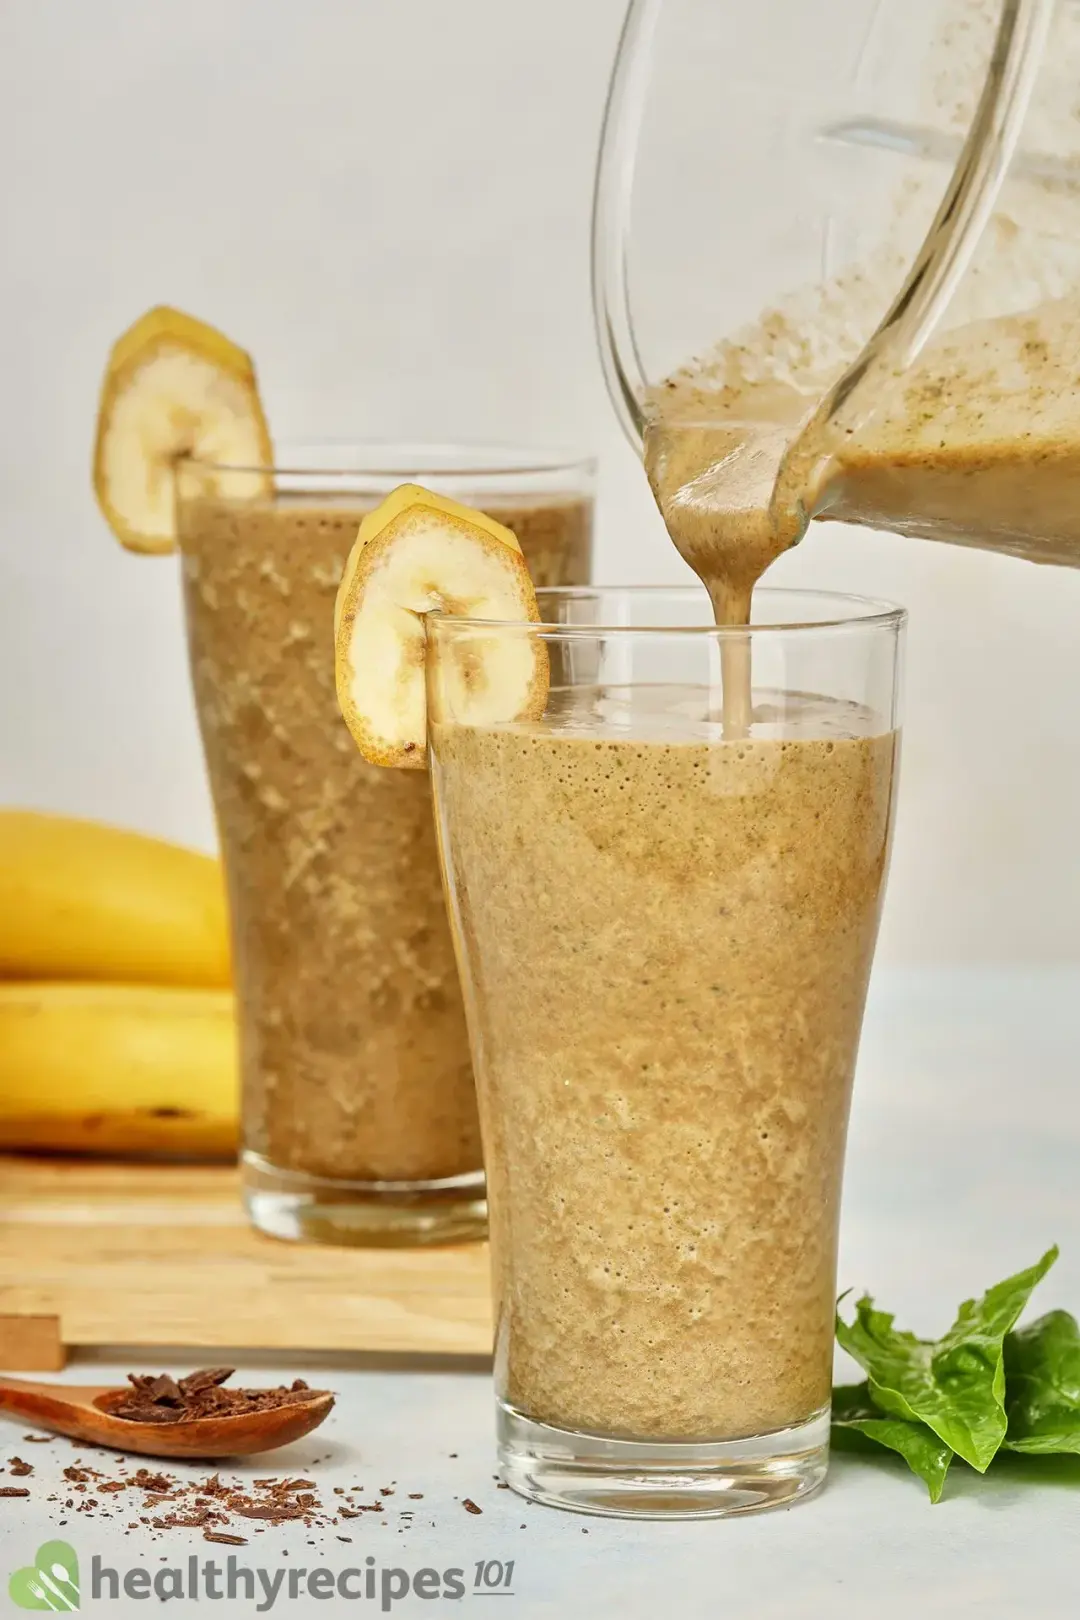 Is This Chocolate Spinach Smoothie Recipe Healthy